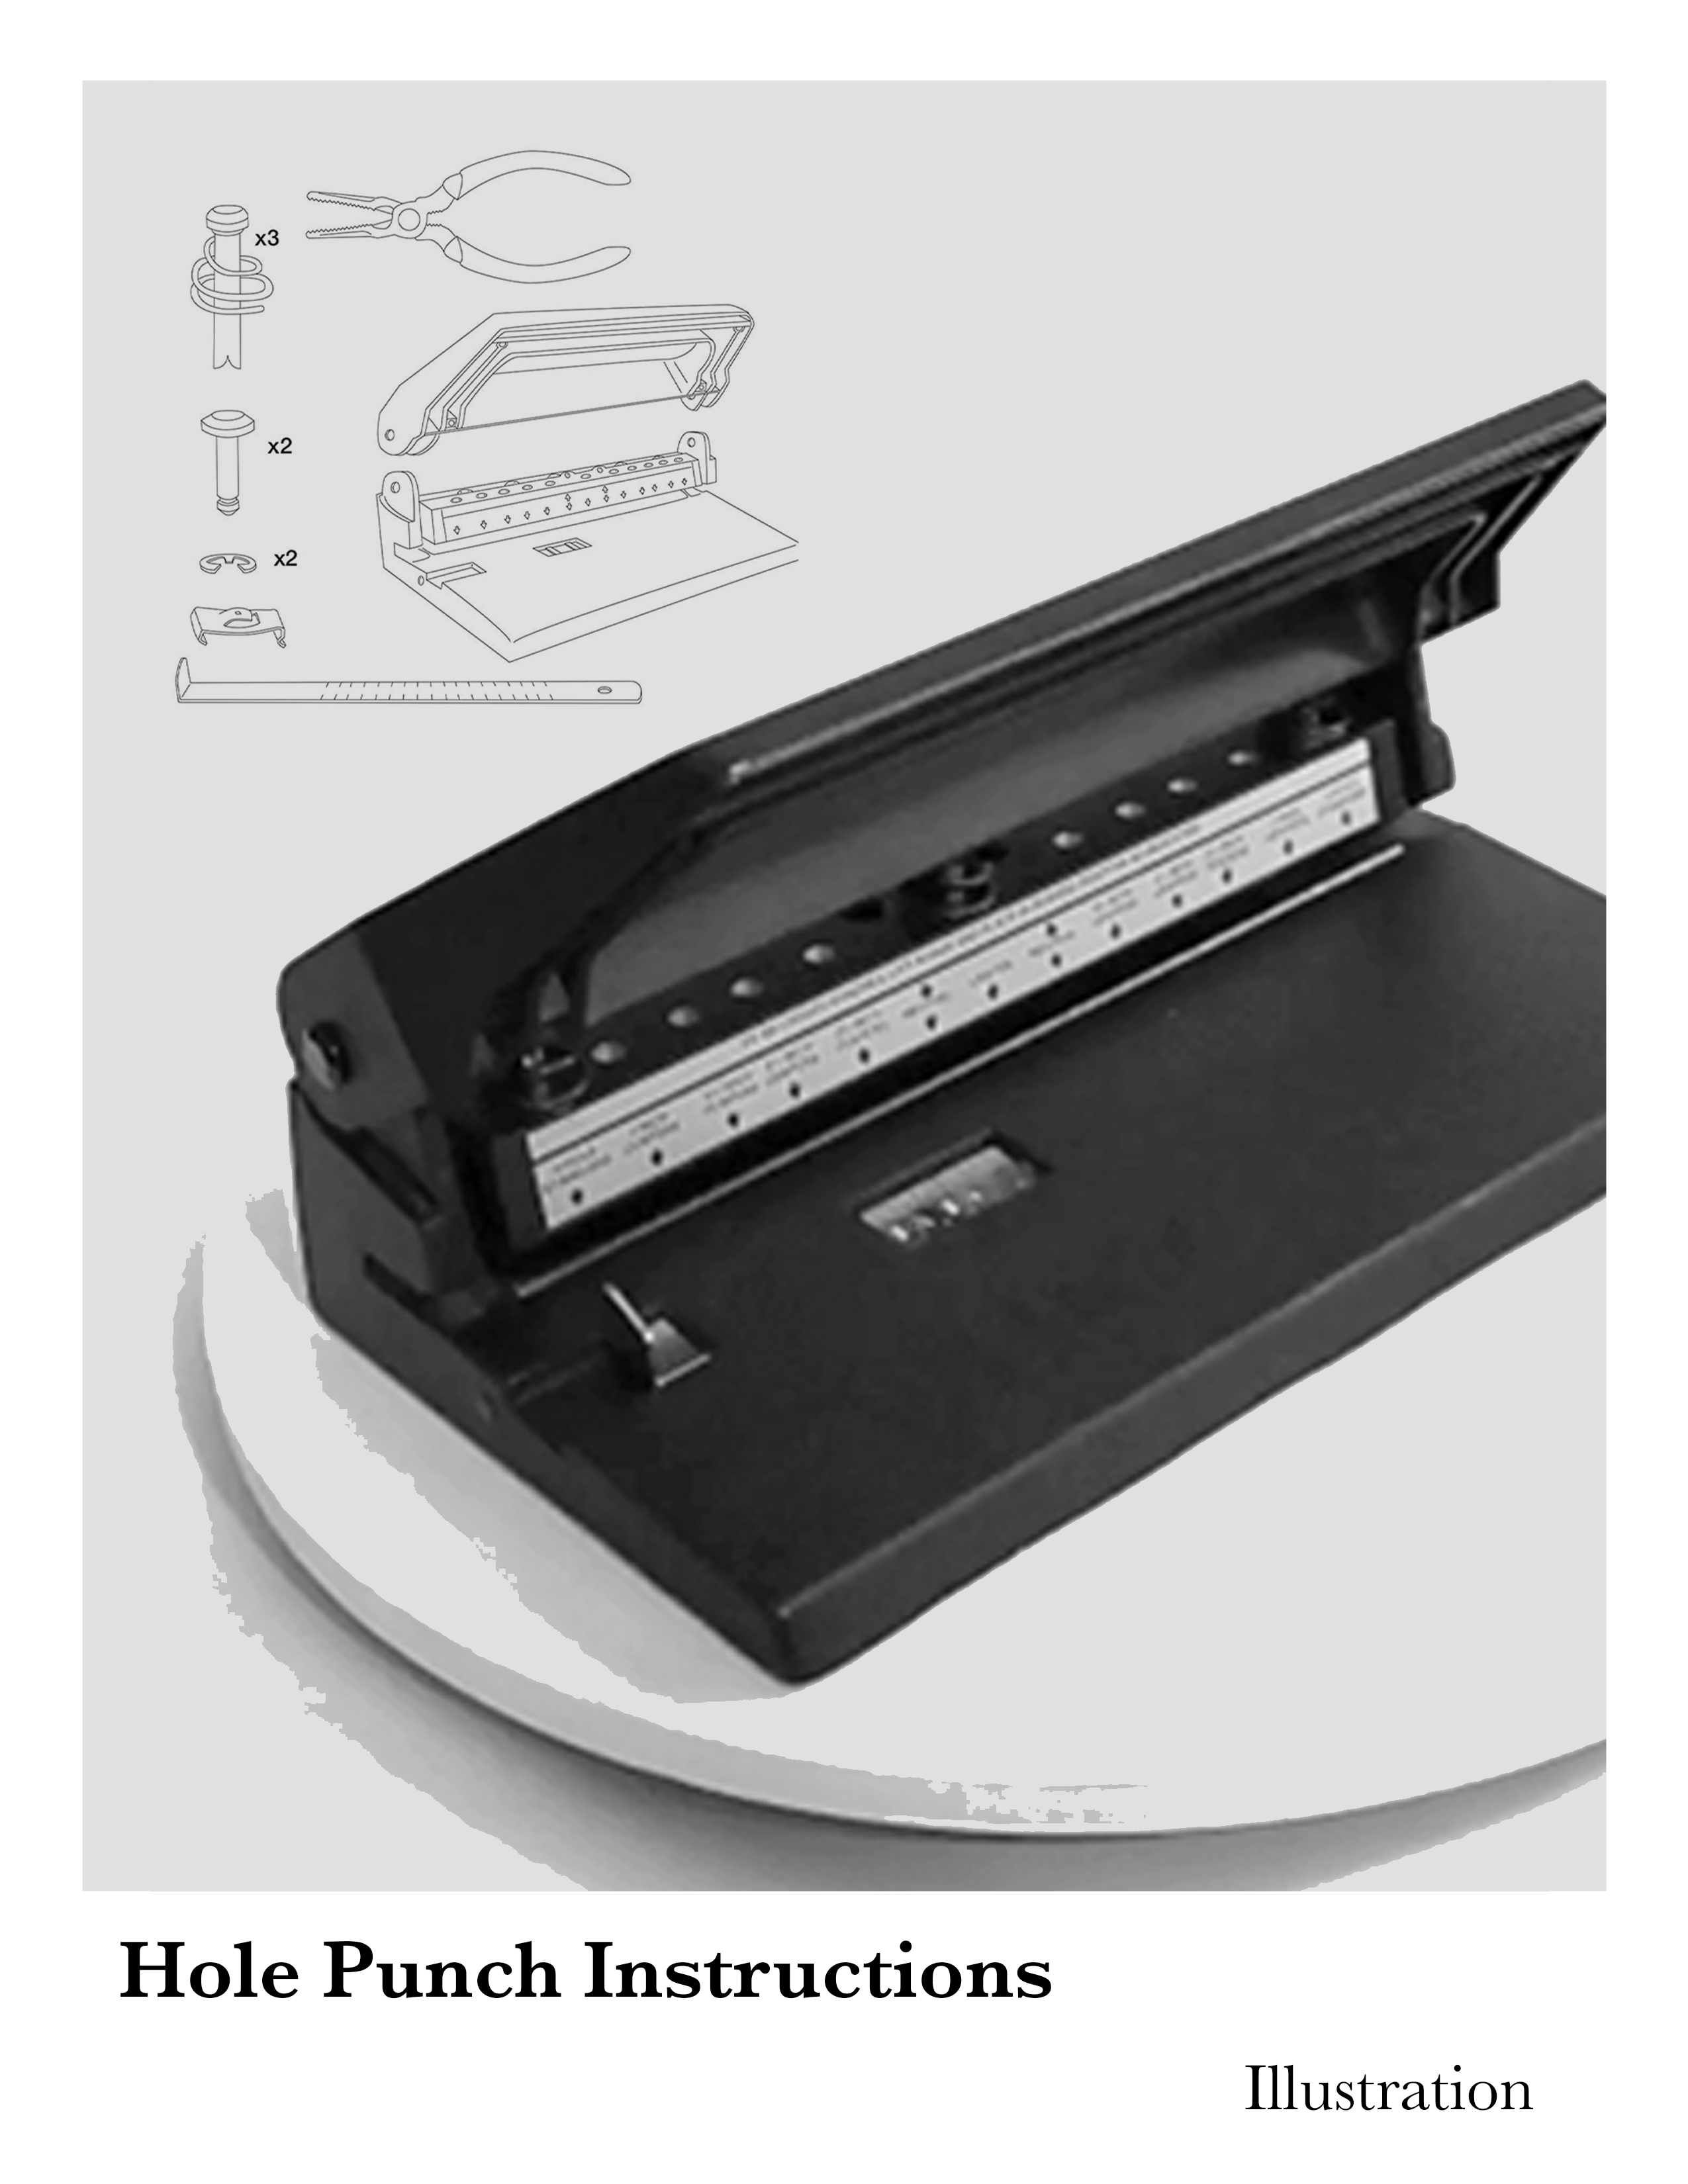 Illustrating the step-by-step instructions for a heavy duty hole punch. 